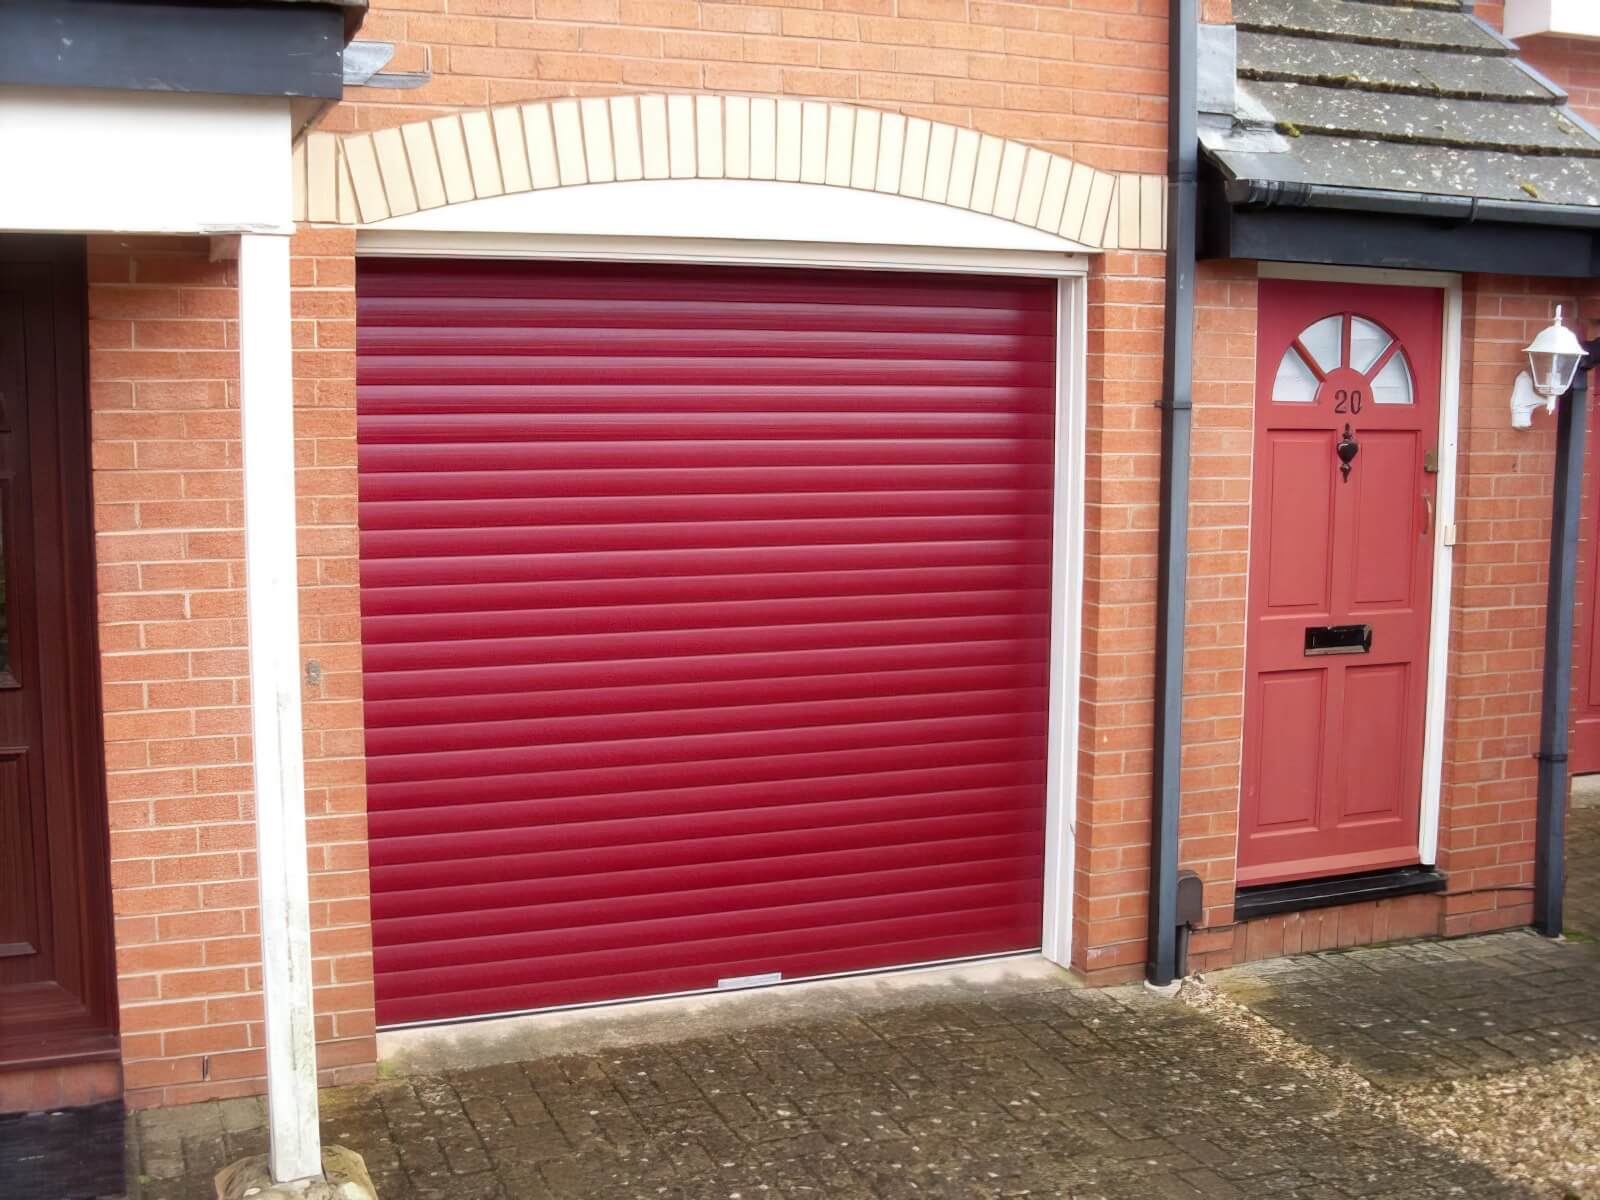 Qualified Honiton Roller Garage Doors experts